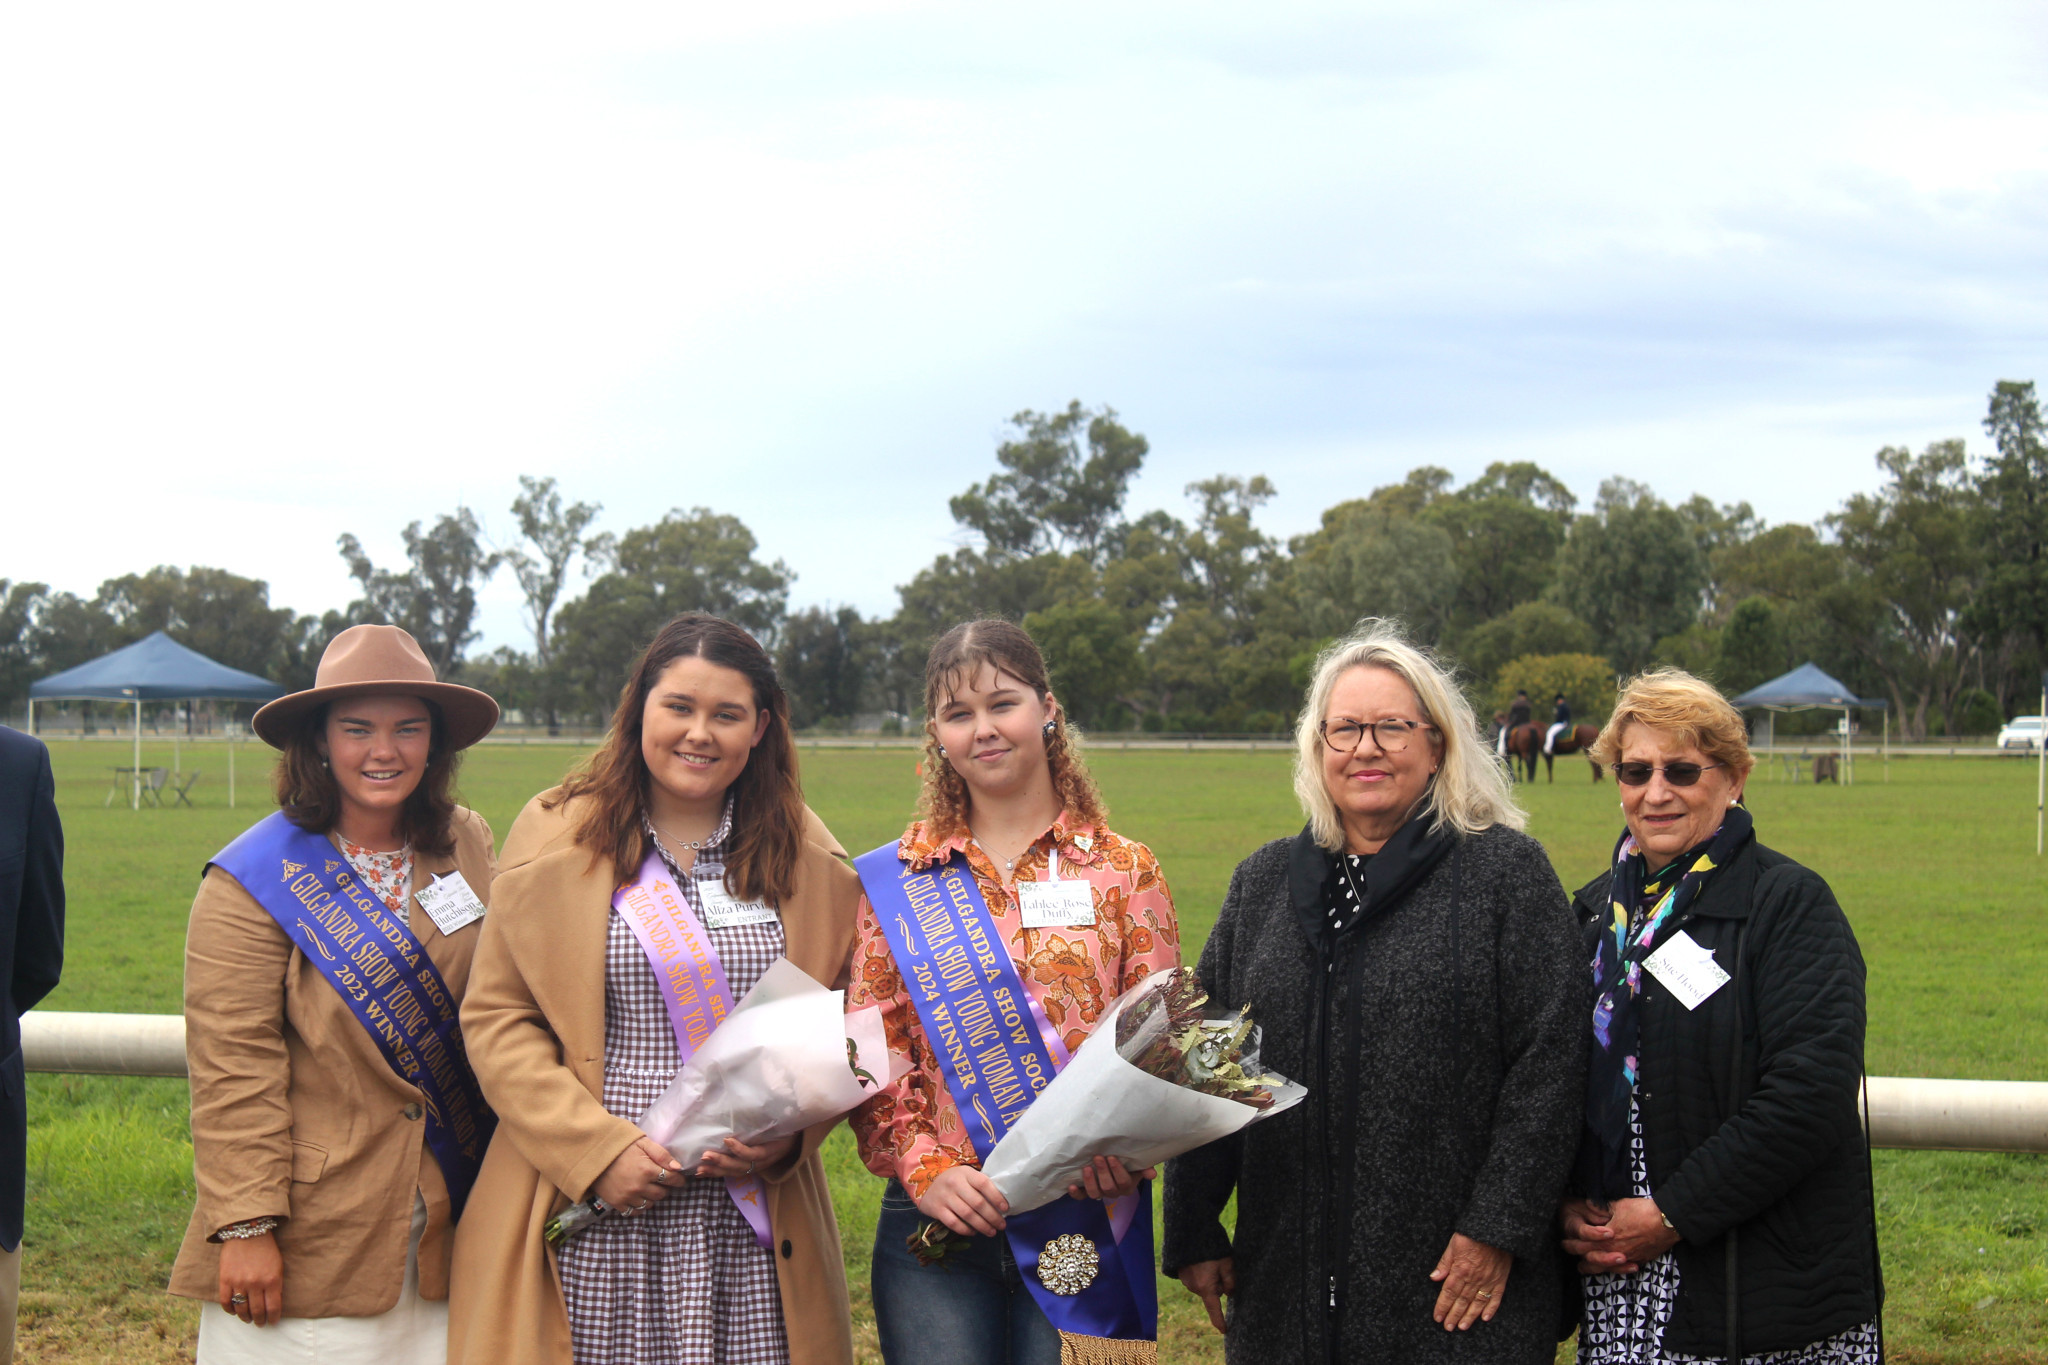 2023 Young Woman Award winner Emma Hutchison stands with 2024 Young Woman entrant Aliza Purvis, and 2024 Young Woman Tahlee-Rose Duffy, alongside Dubbo judges Pip Archer and Sue Hood. Photo by The Gilgandra Weekly: Nicholas Croker.